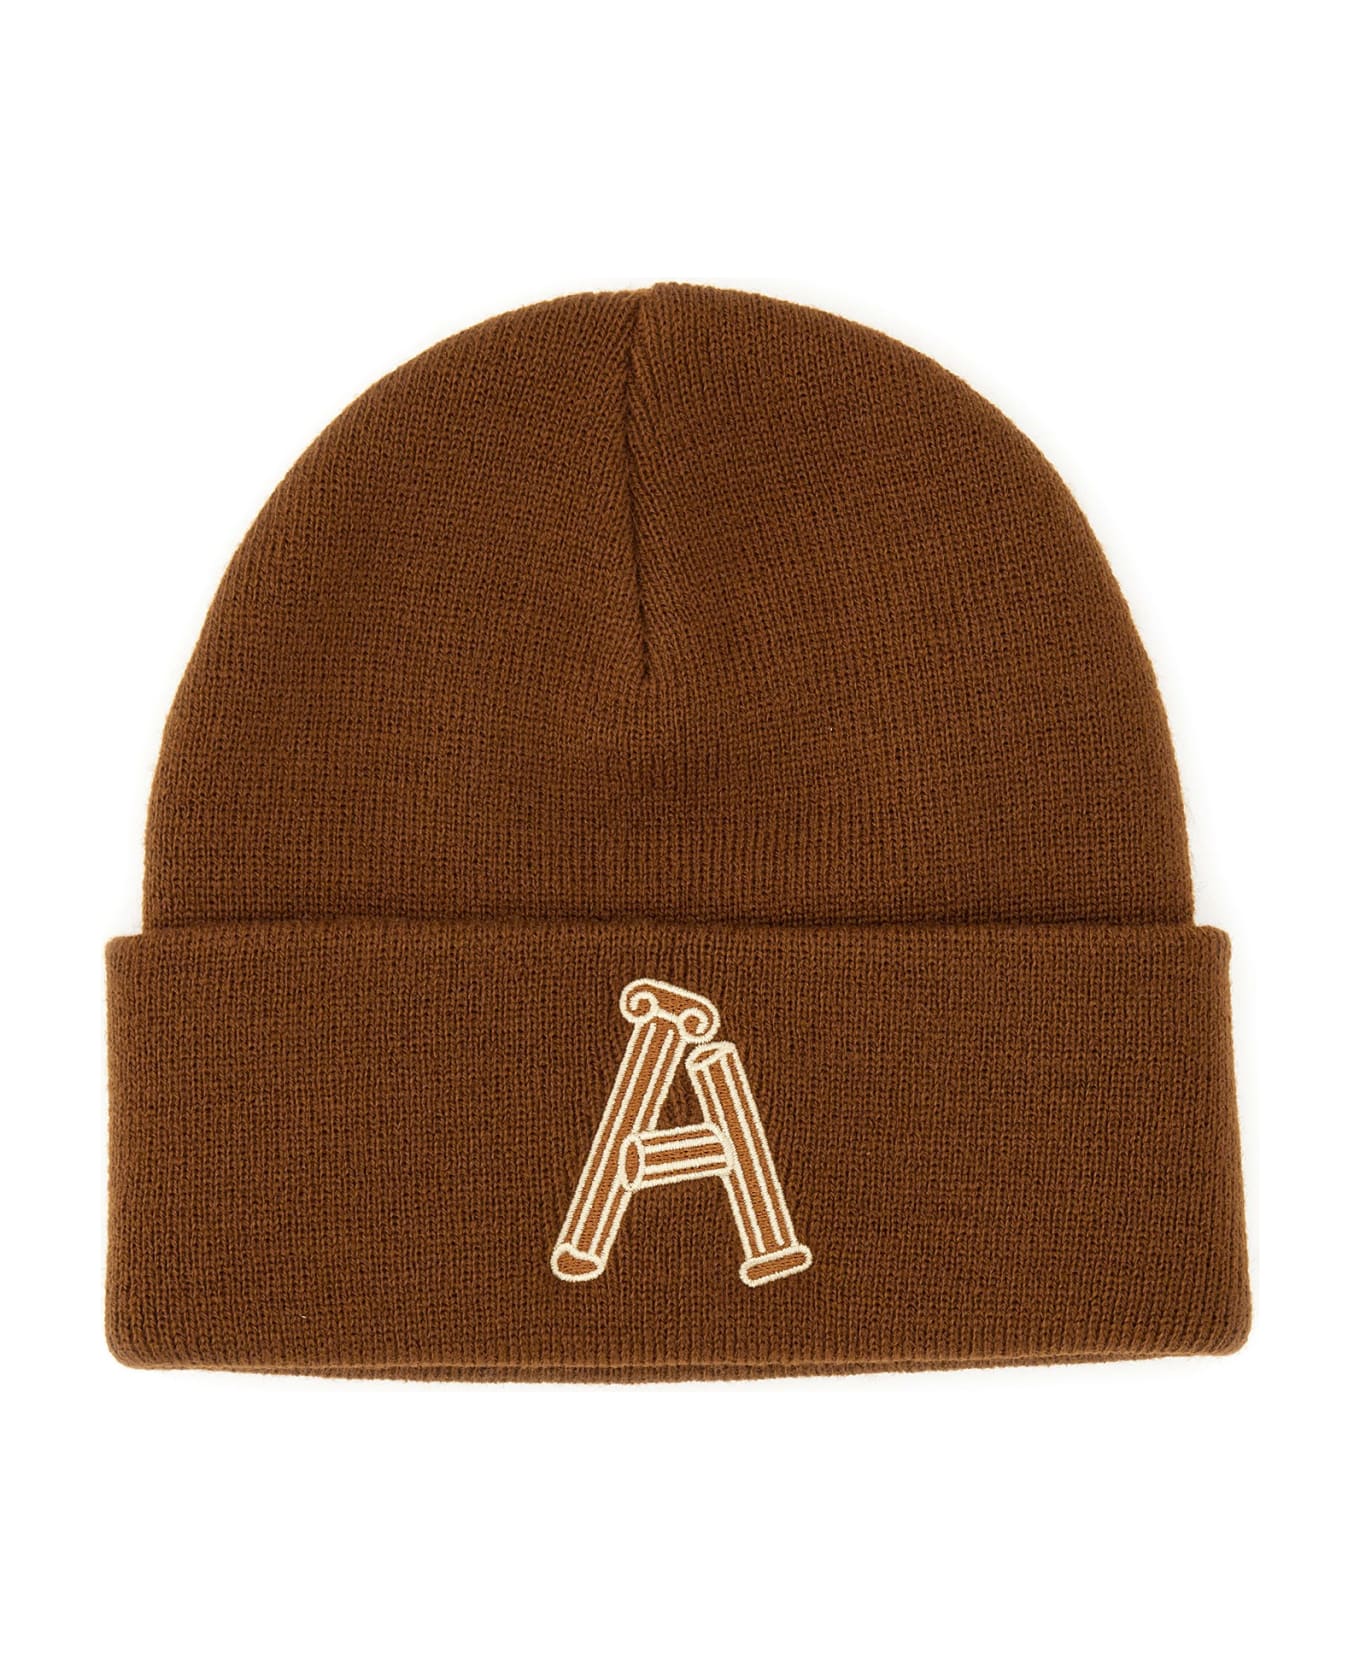 Aries Hat With Logo - Brown 帽子